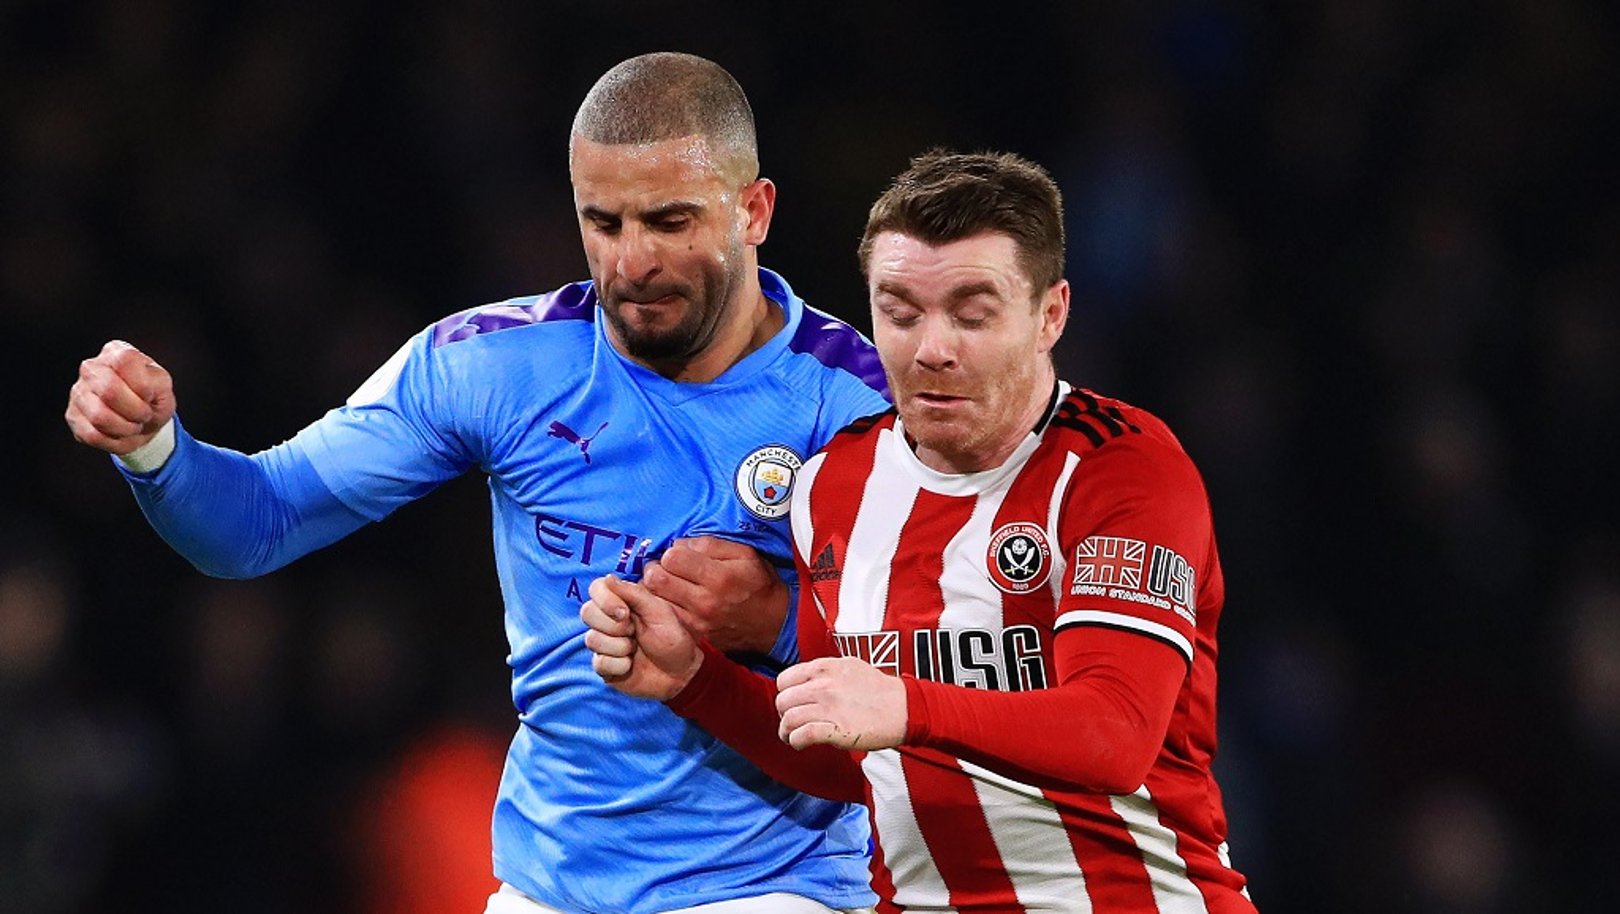 Where can I watch Sheffield United v City on TV?